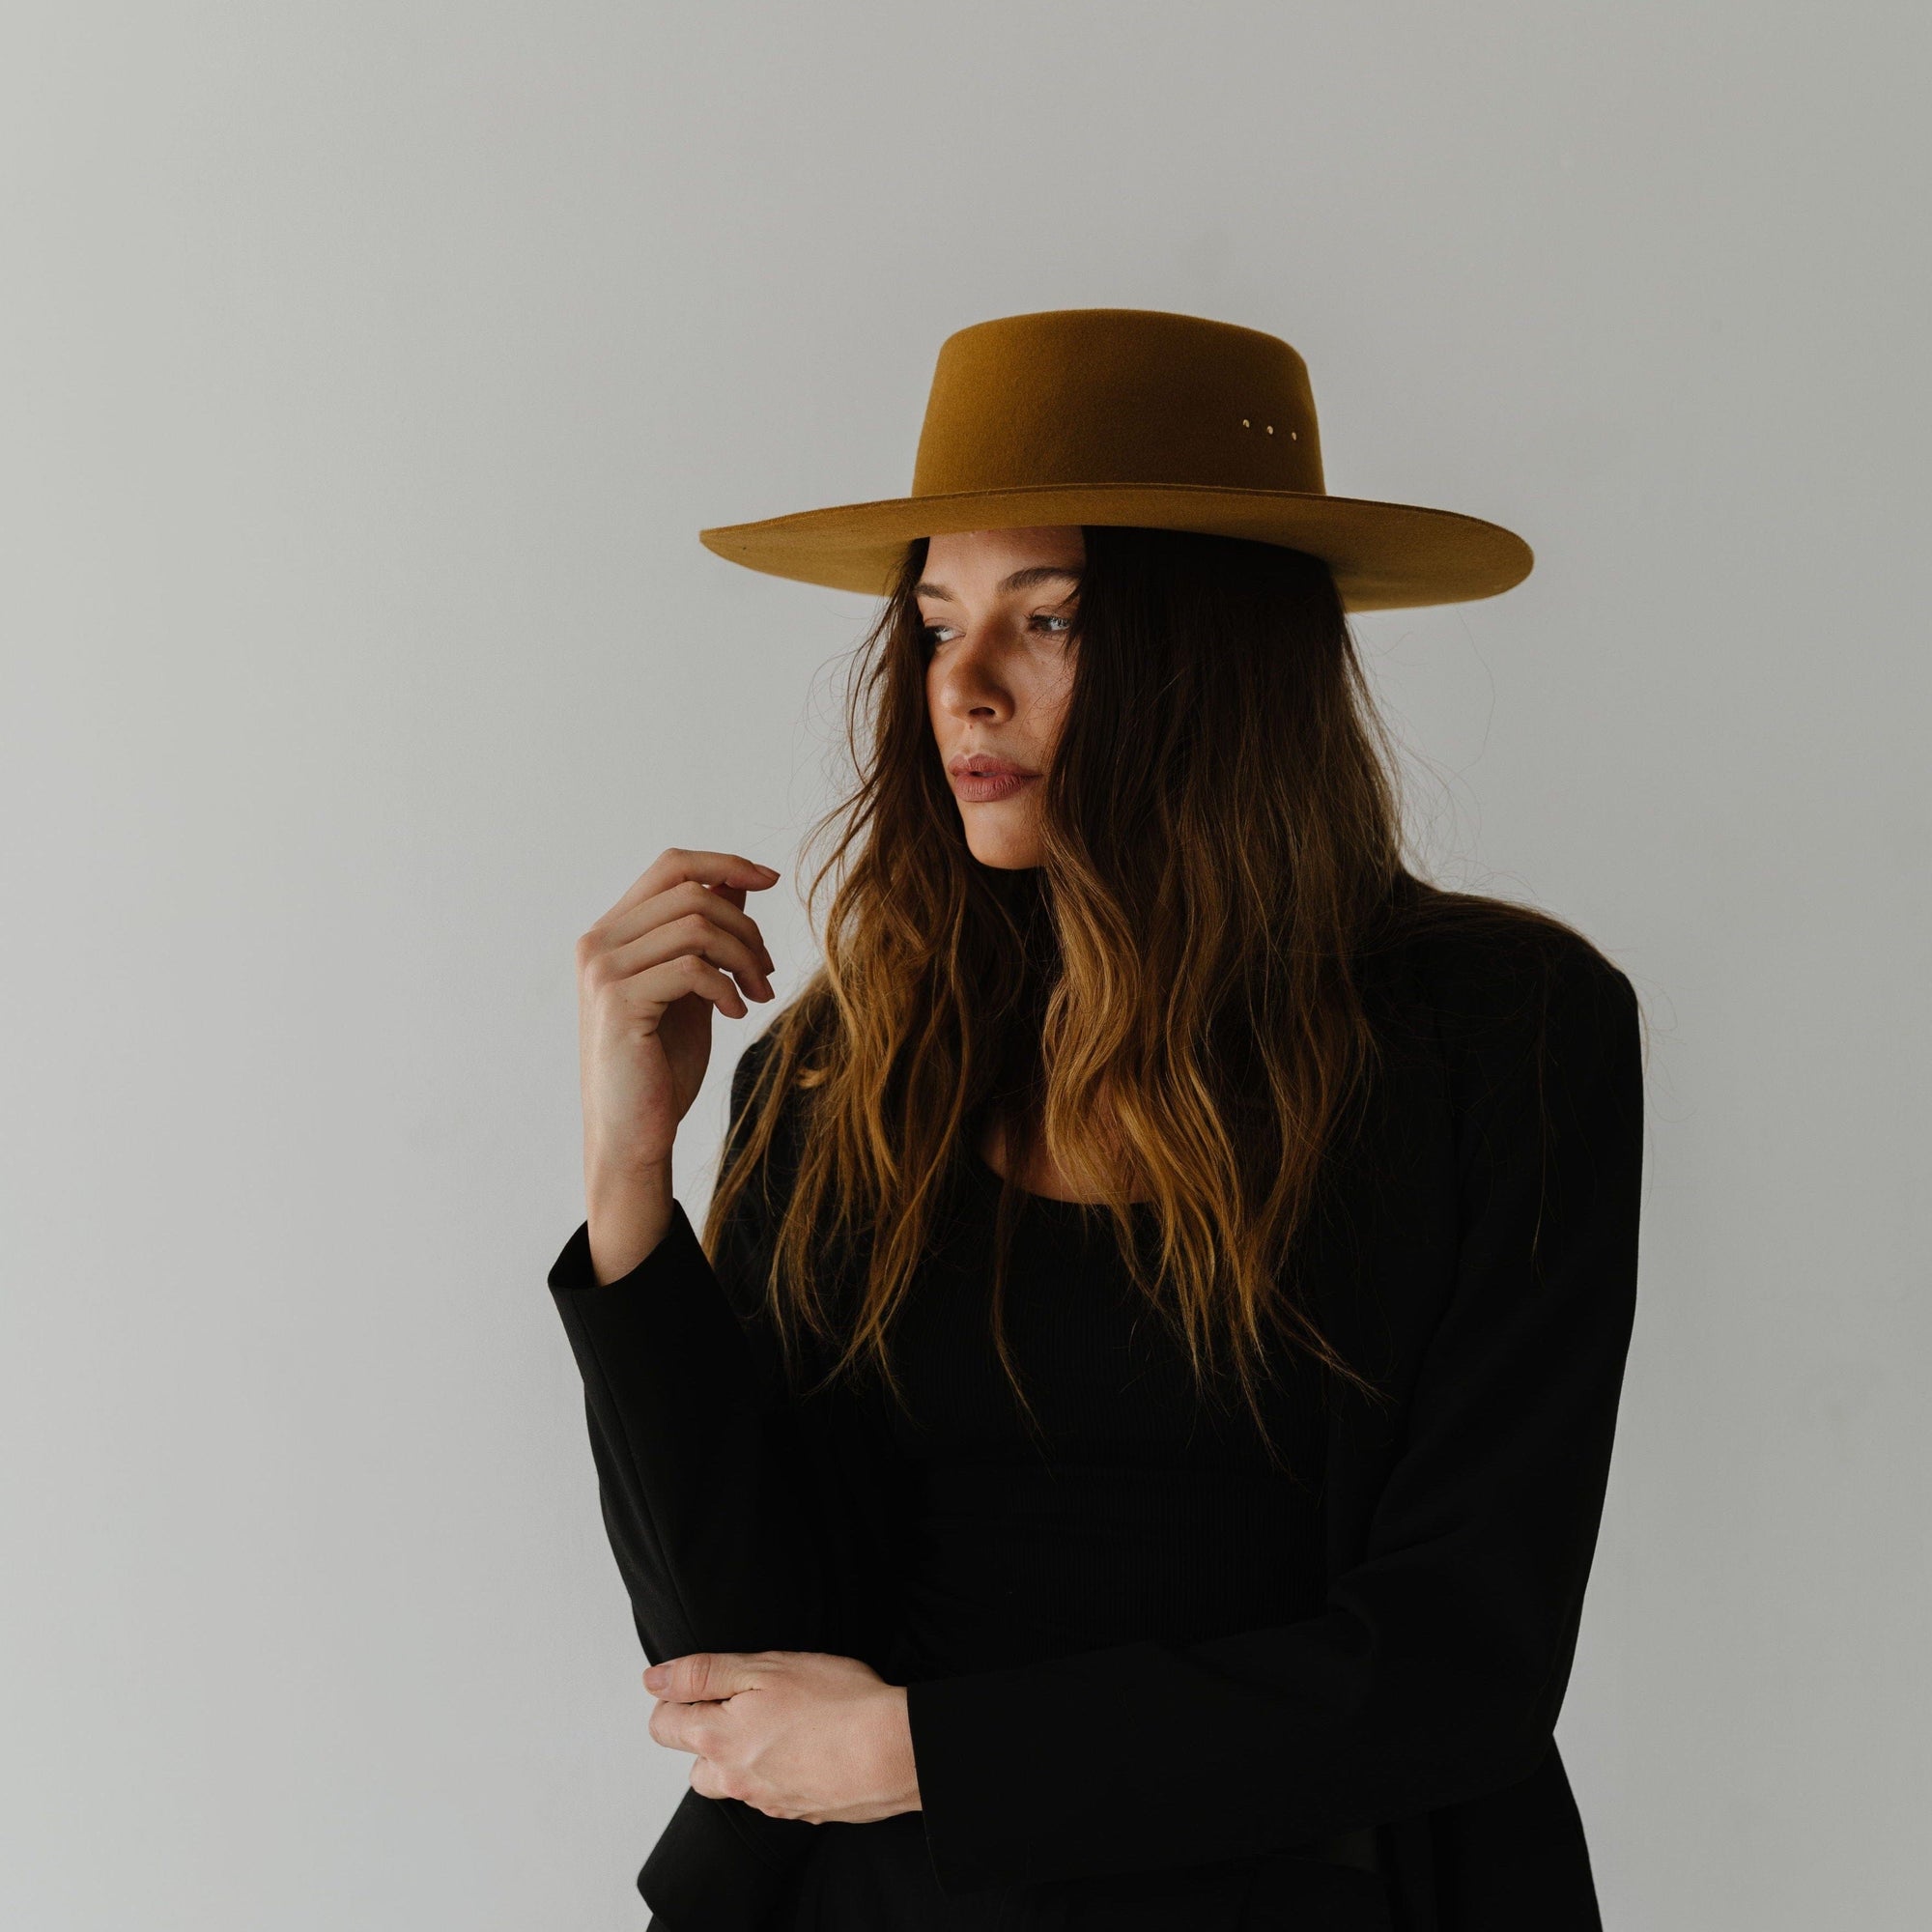 Gigi Pip felt hats for women - Linden Boater - telescope boater crown with a flat brim and three gold plated metal studs [dark oak]